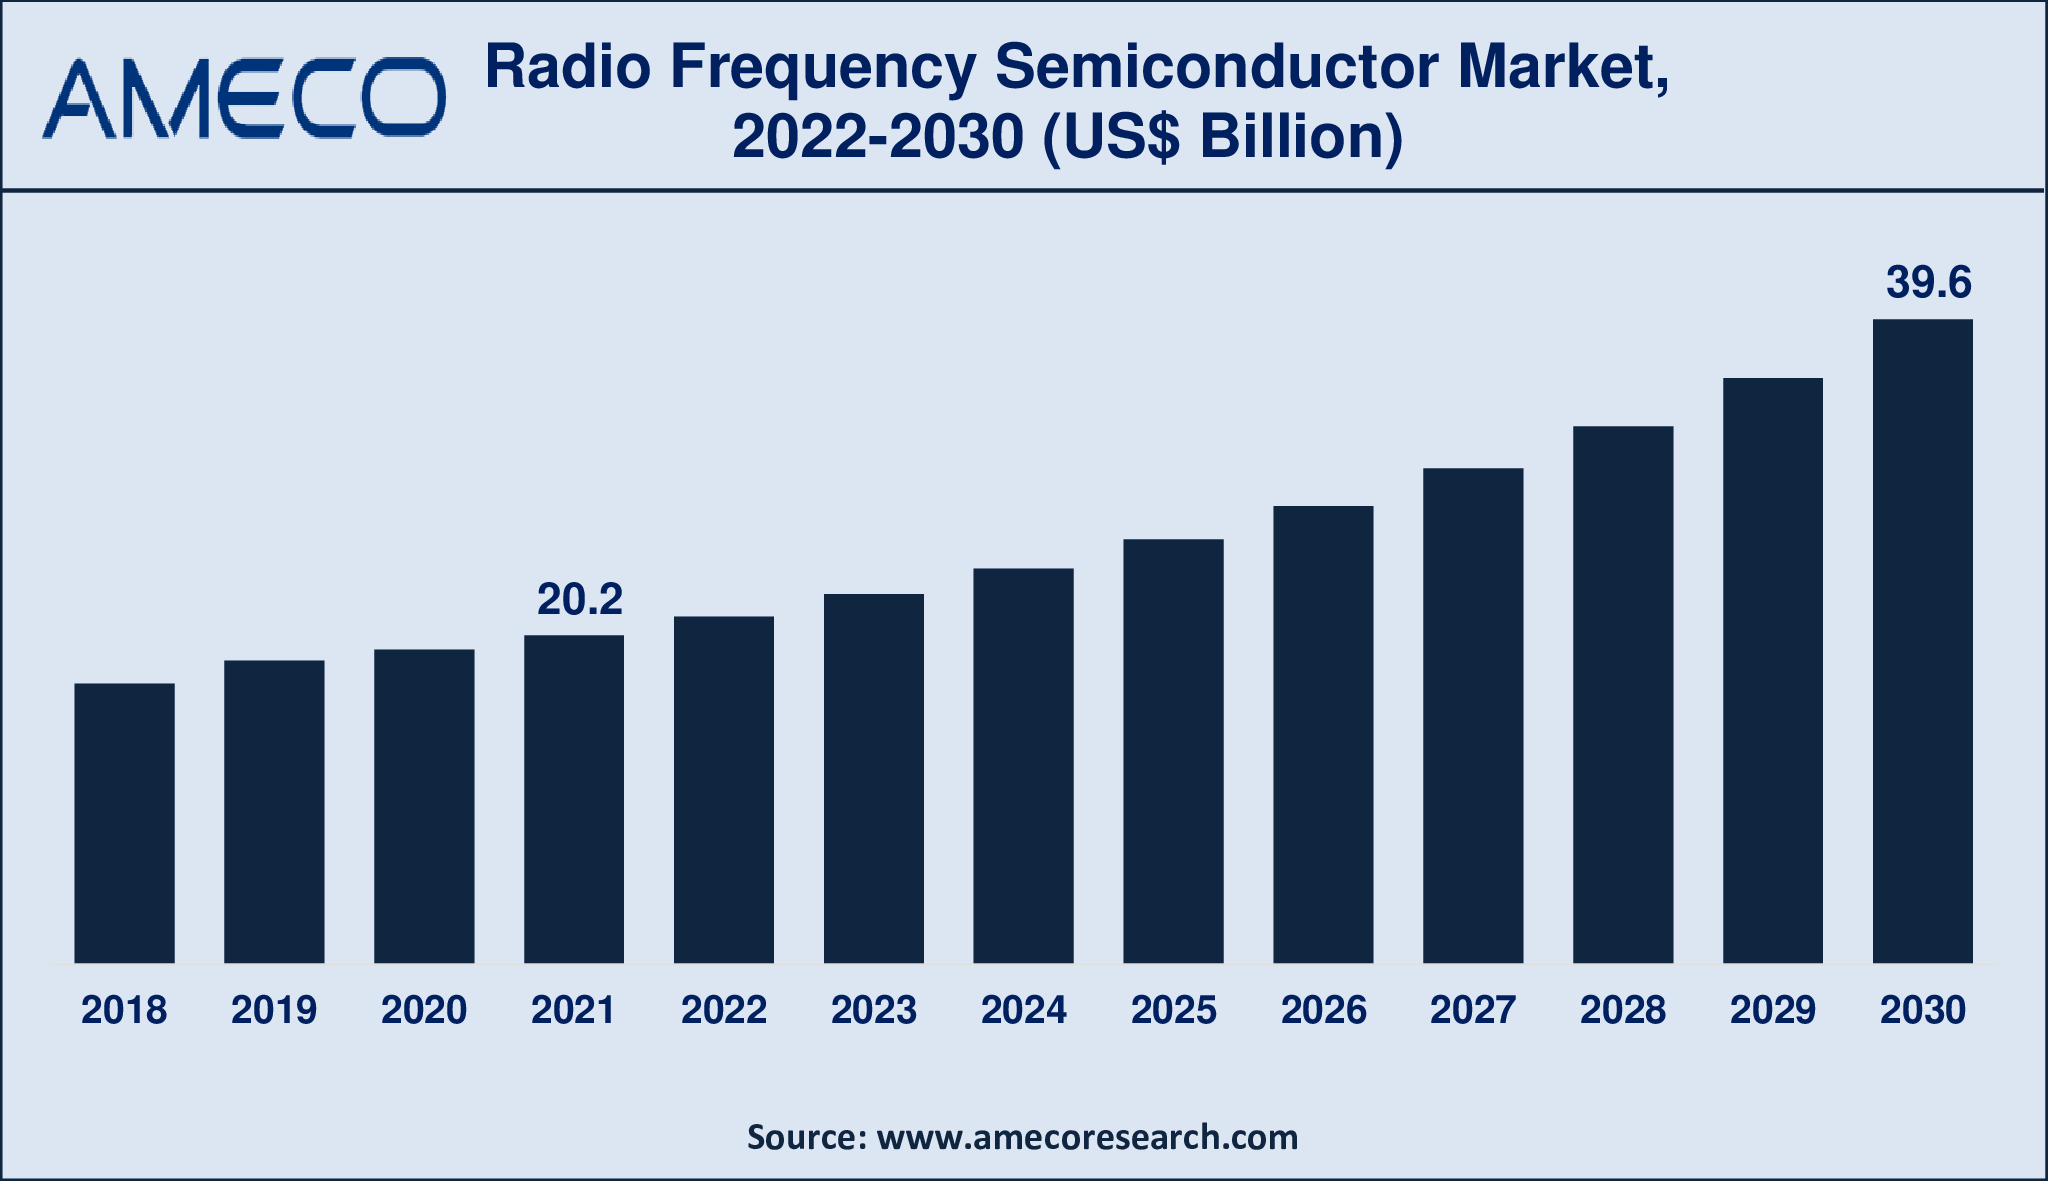 Radio Frequency Semiconductor Market Report 2030